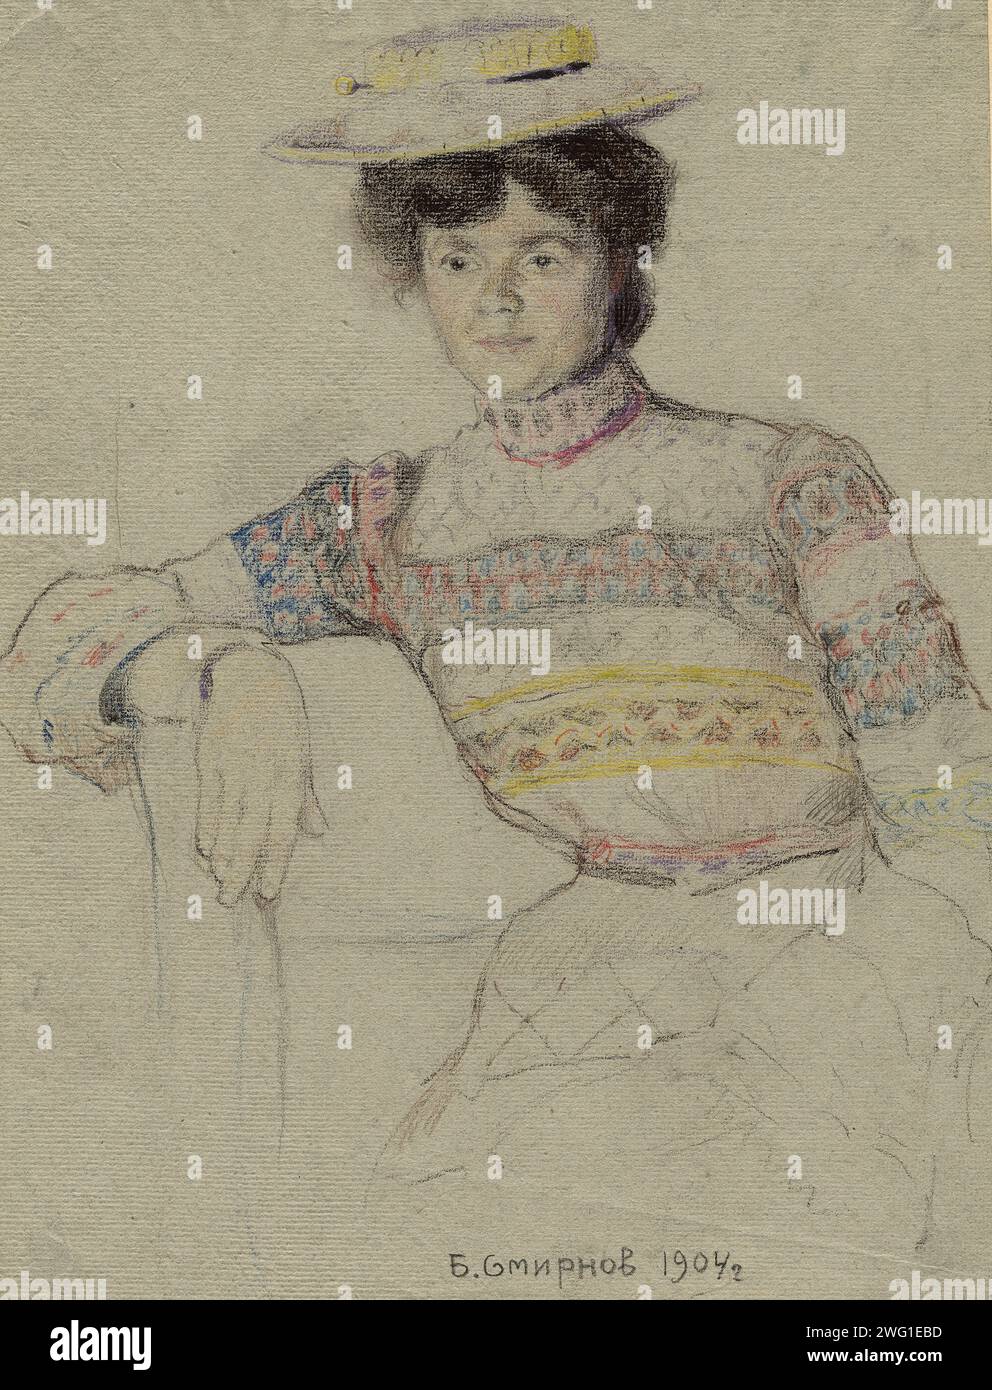 A Young Lady from Omsk in a Mordovian Outfit. Irkutsk, 1904. Boris Vasilievich Smirnov (1881-1954) was a Russian artist who in 1904 traveled by prisoner transport from western Russia across Siberia. Along the way he created a series of drawings and watercolors of the people and places he encountered. Novosibirsk State Museum of Regional History and Folklife Stock Photo